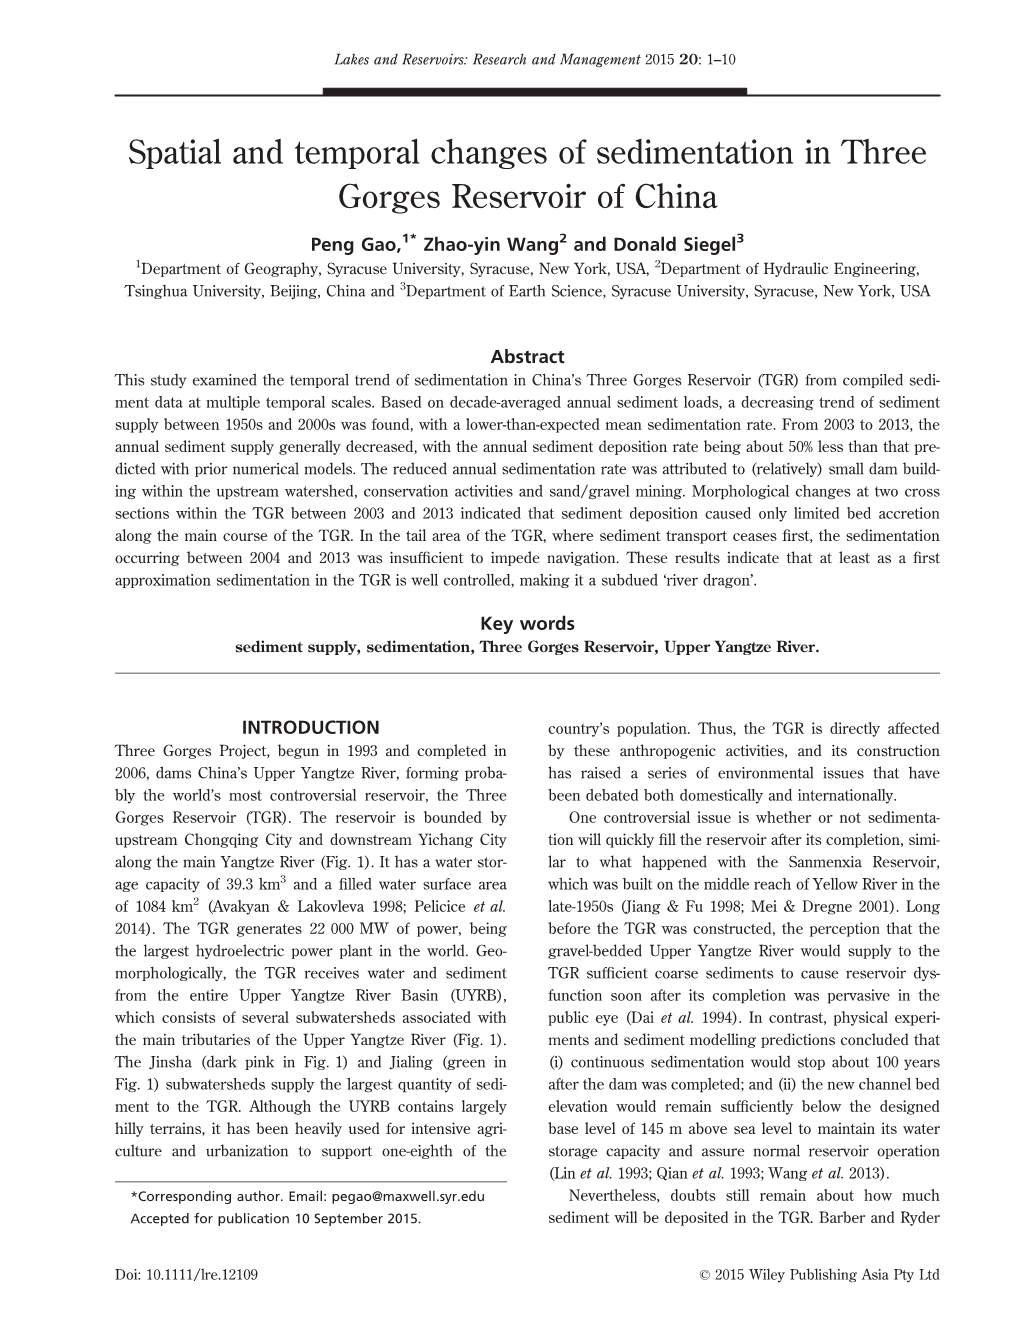 Spatial and Temporal Changes of Sedimentation in Three Gorges Reservoir of China